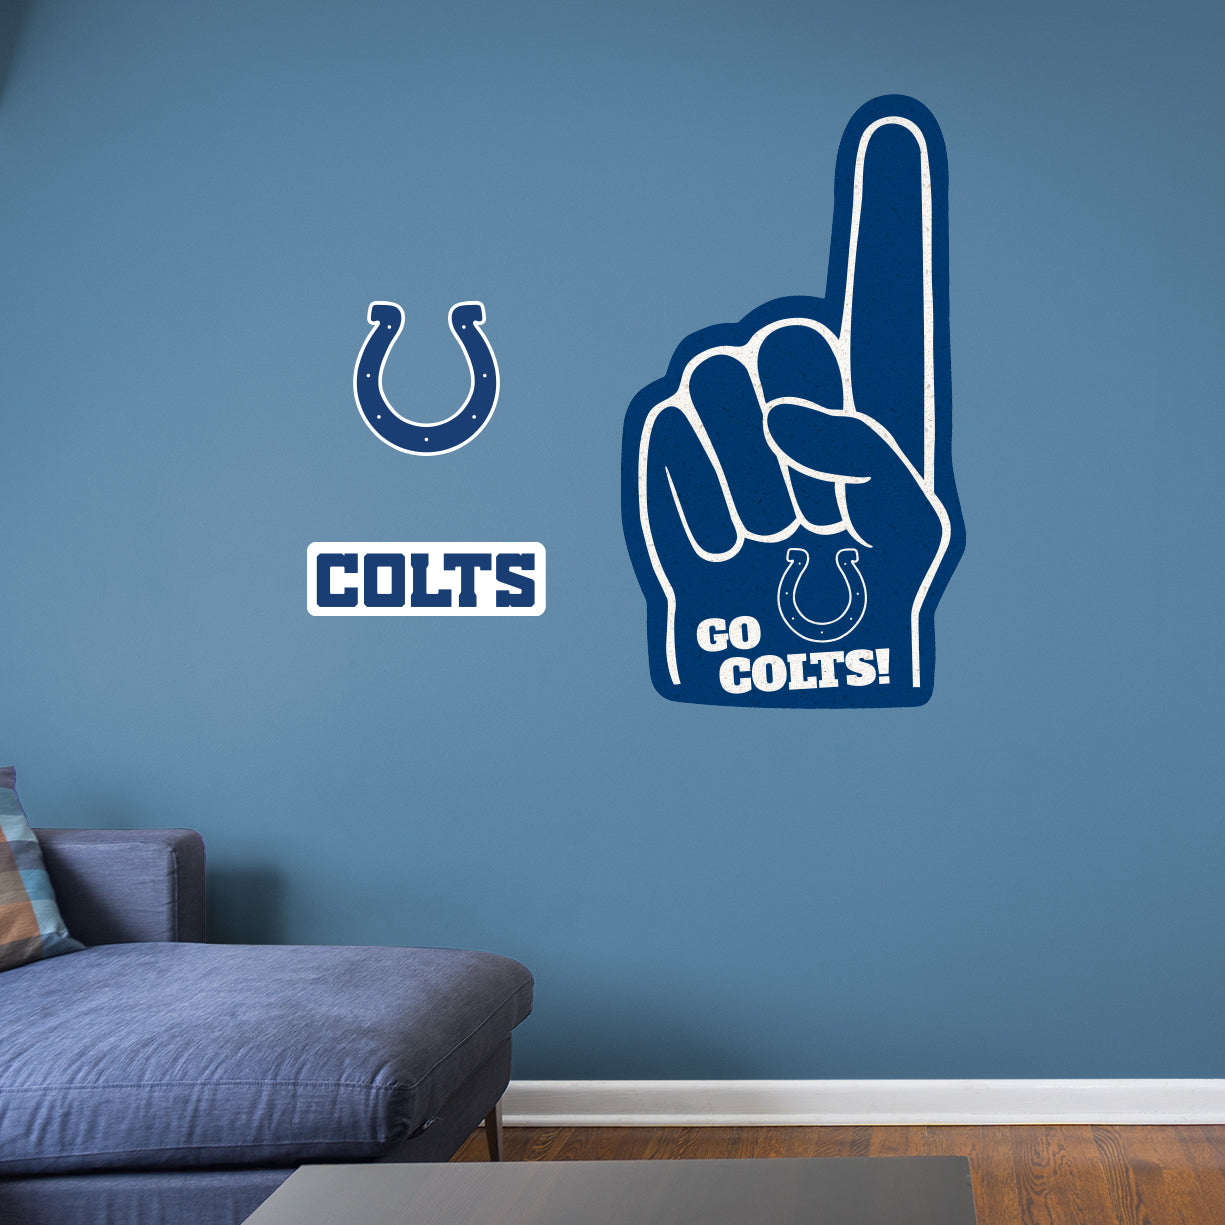 Indianapolis Colts: Foam Finger - Officially Licensed NFL Removable Adhesive Decal